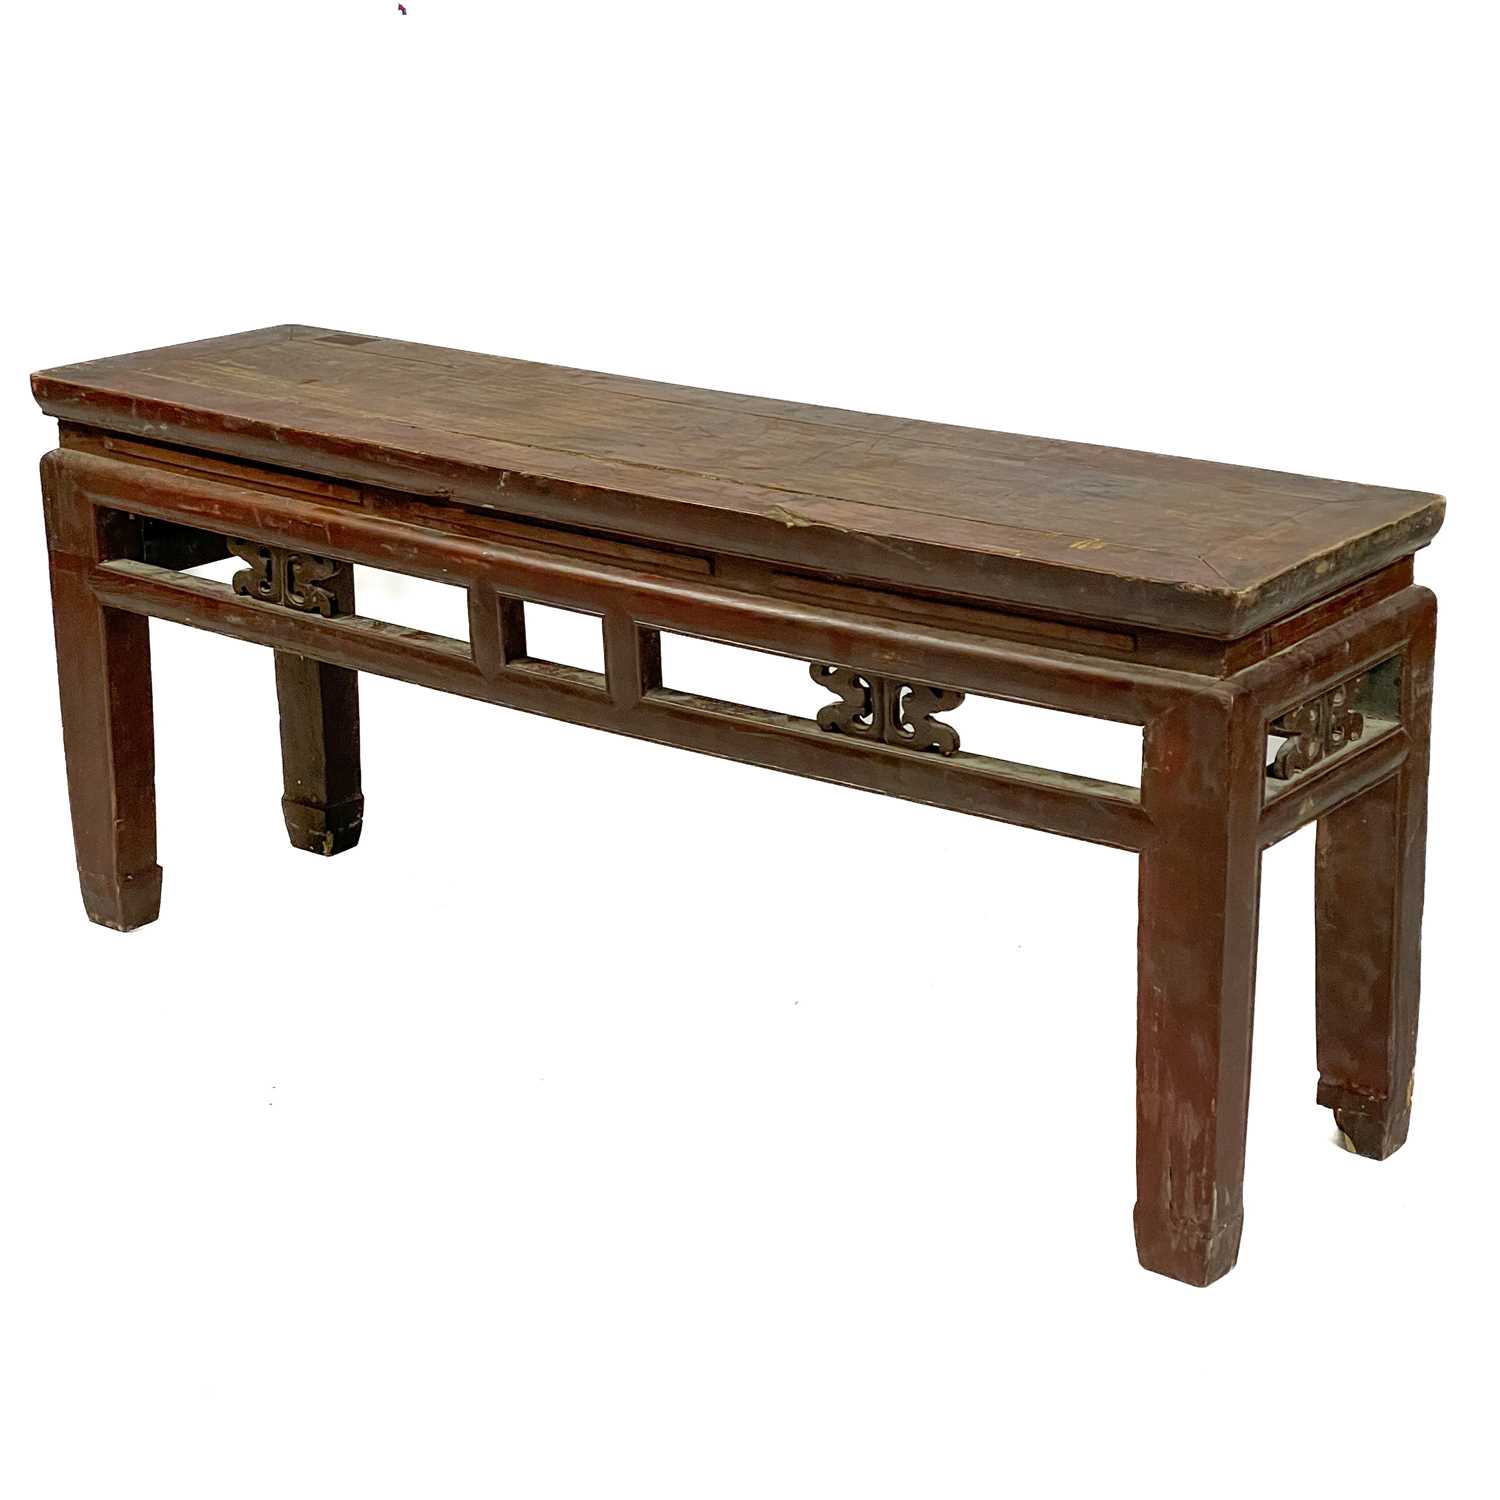 Two similar Chinese hardwood centre tables - Image 5 of 5